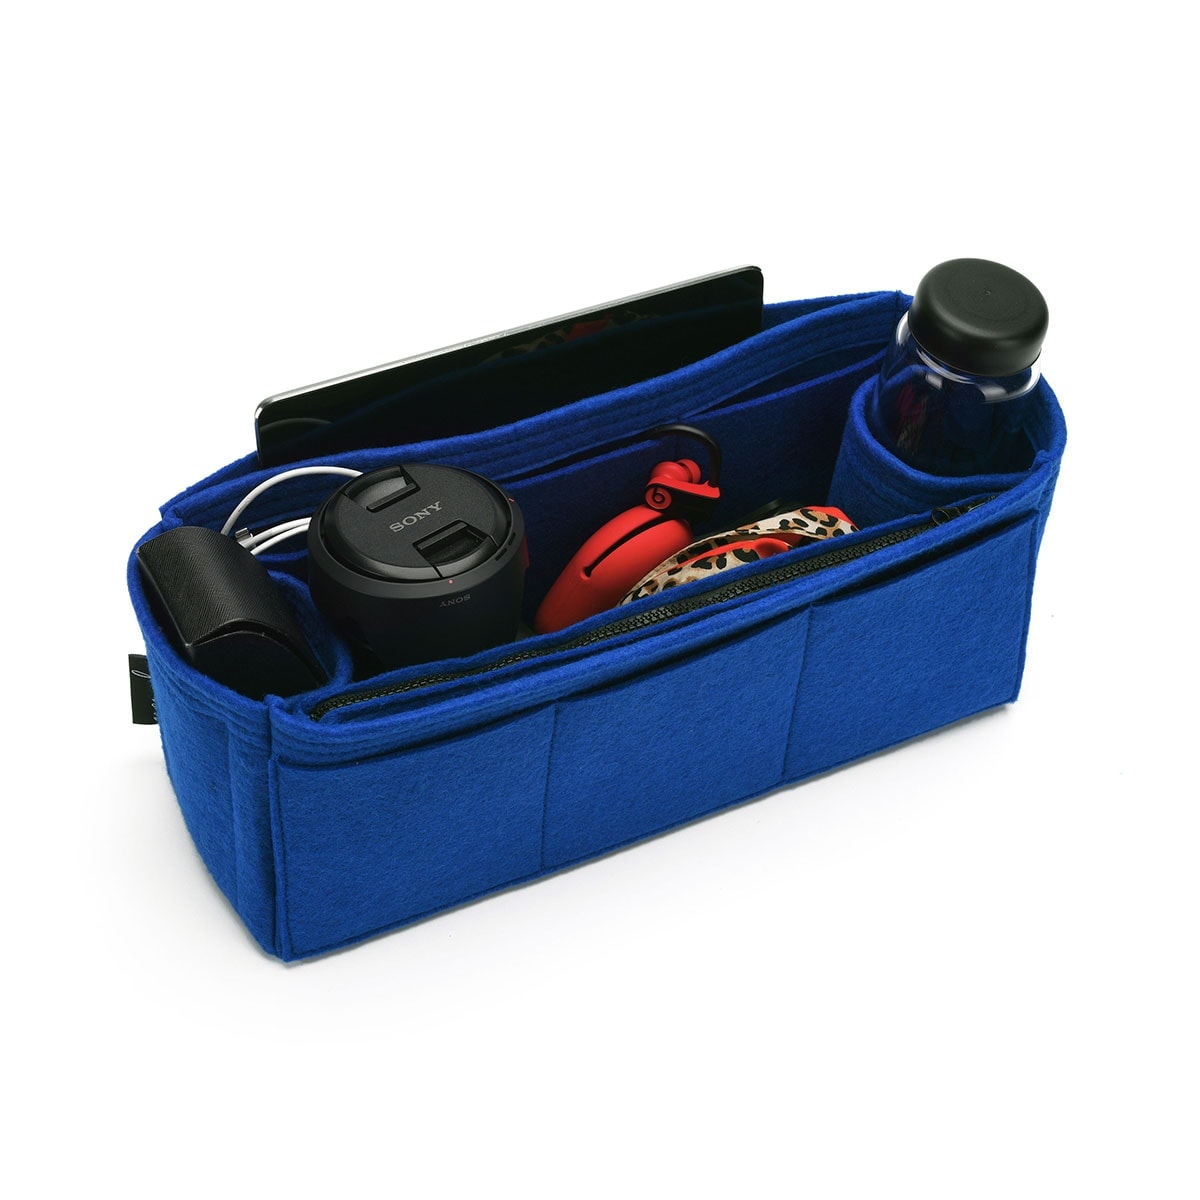 Custom Size Bag Organizer with Double Bottle Holders and Exterior